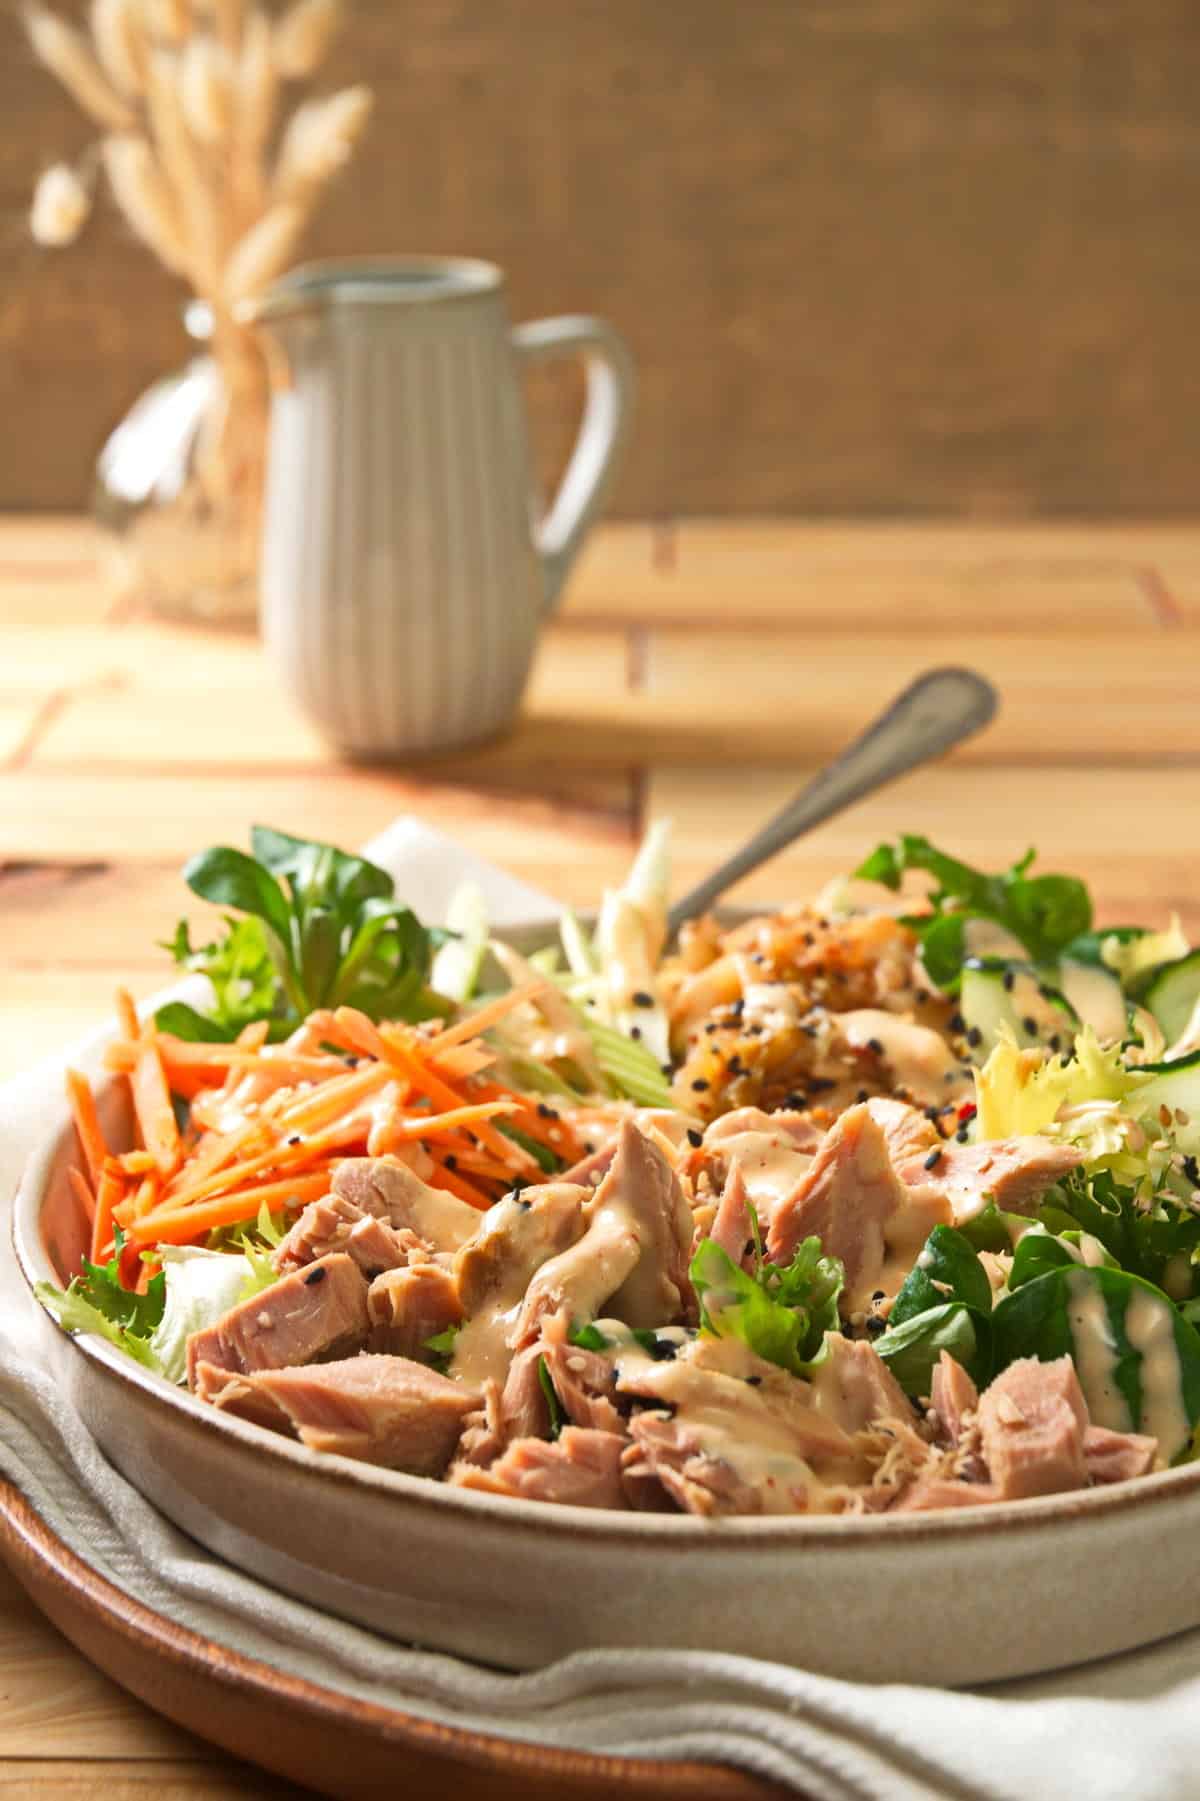 Salad with canned tuna, julienned carrots, lettuce, dressing, etc., on a plate.